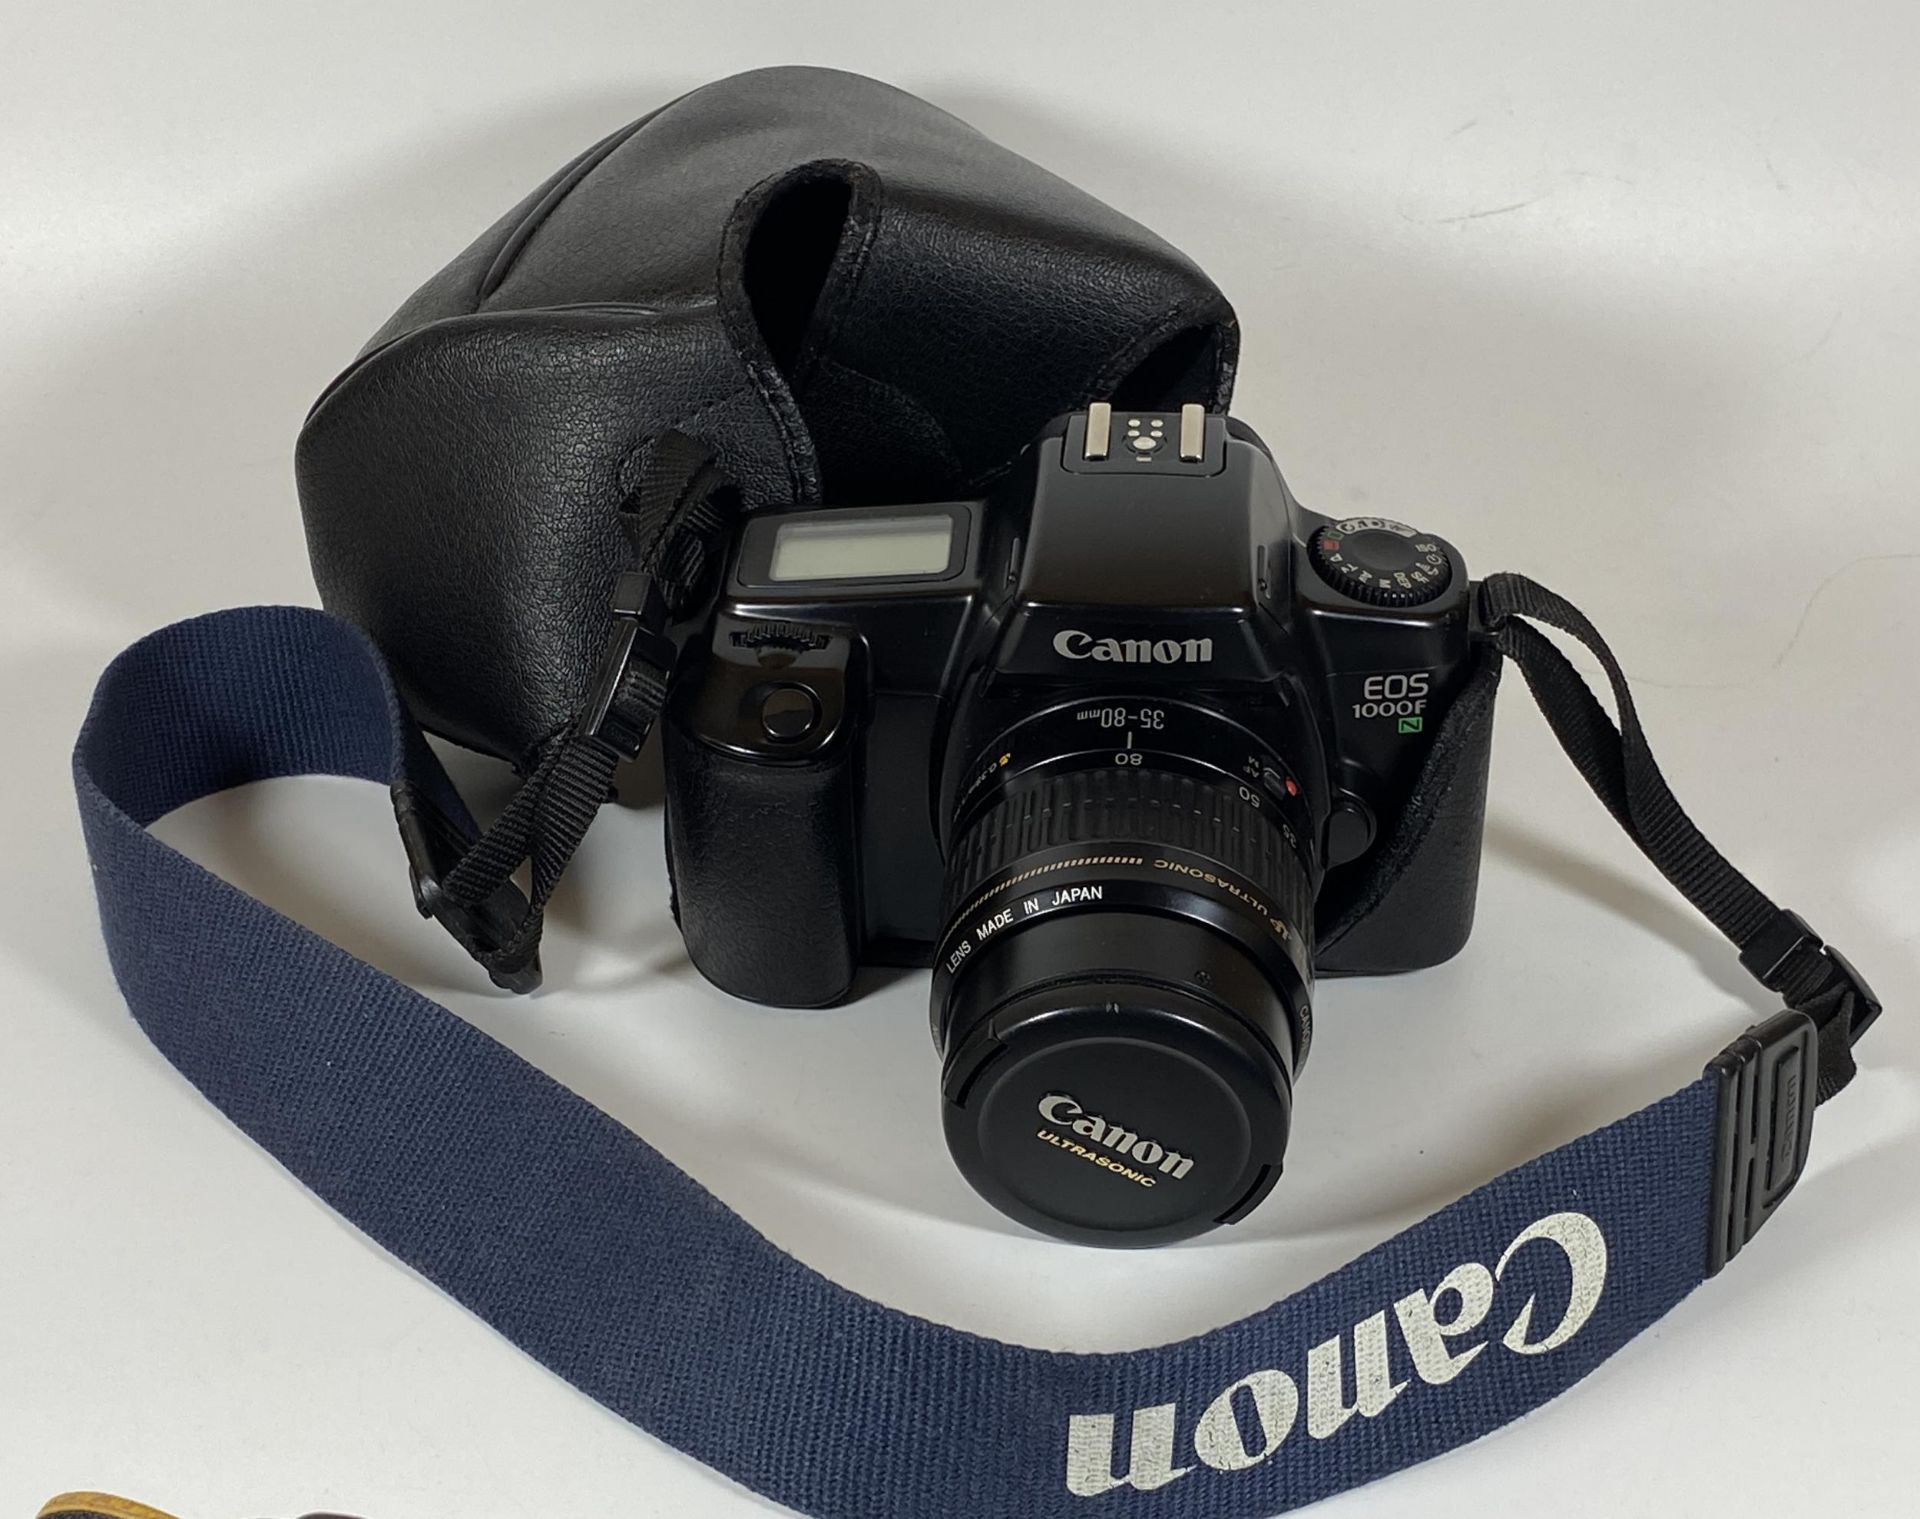 A CANON EOS 1000F N CAMERA FITTED WITH CANON ZOOM 35-80MM LENS AND CANON STRAP AND BAG